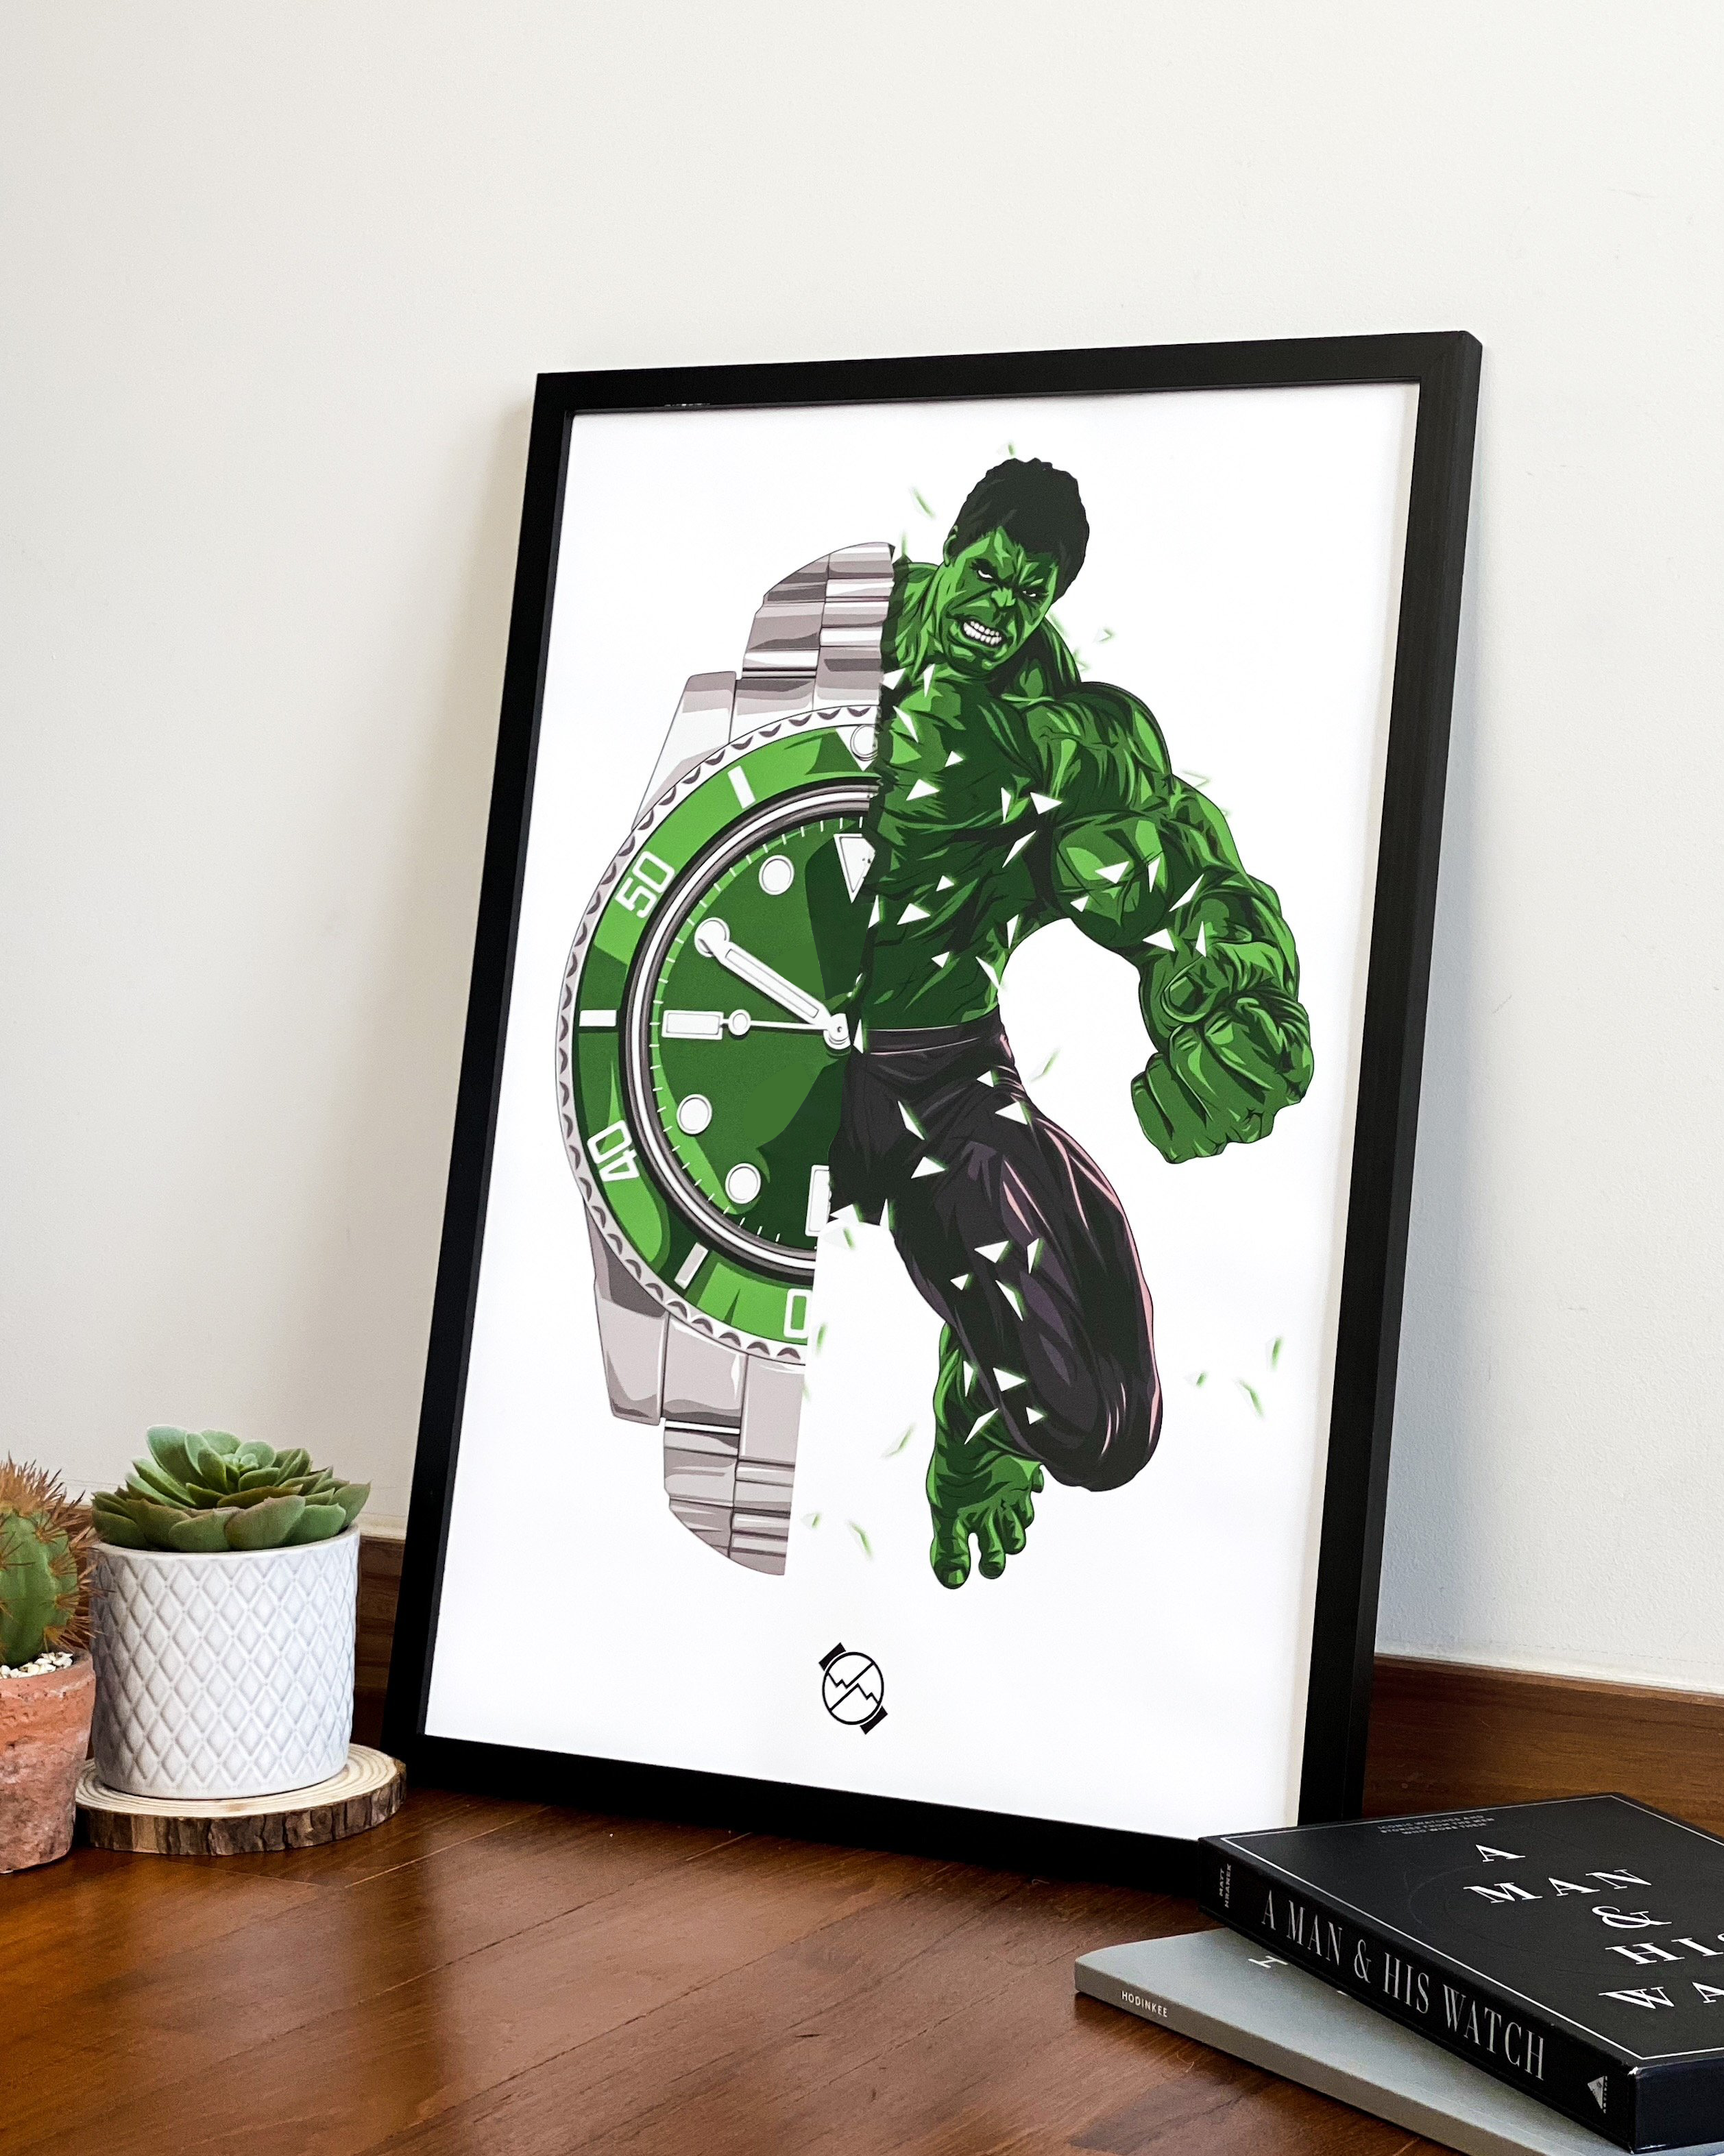 Rolex Submariner Hulk Poster  Quality Prints – Wind It On The Move